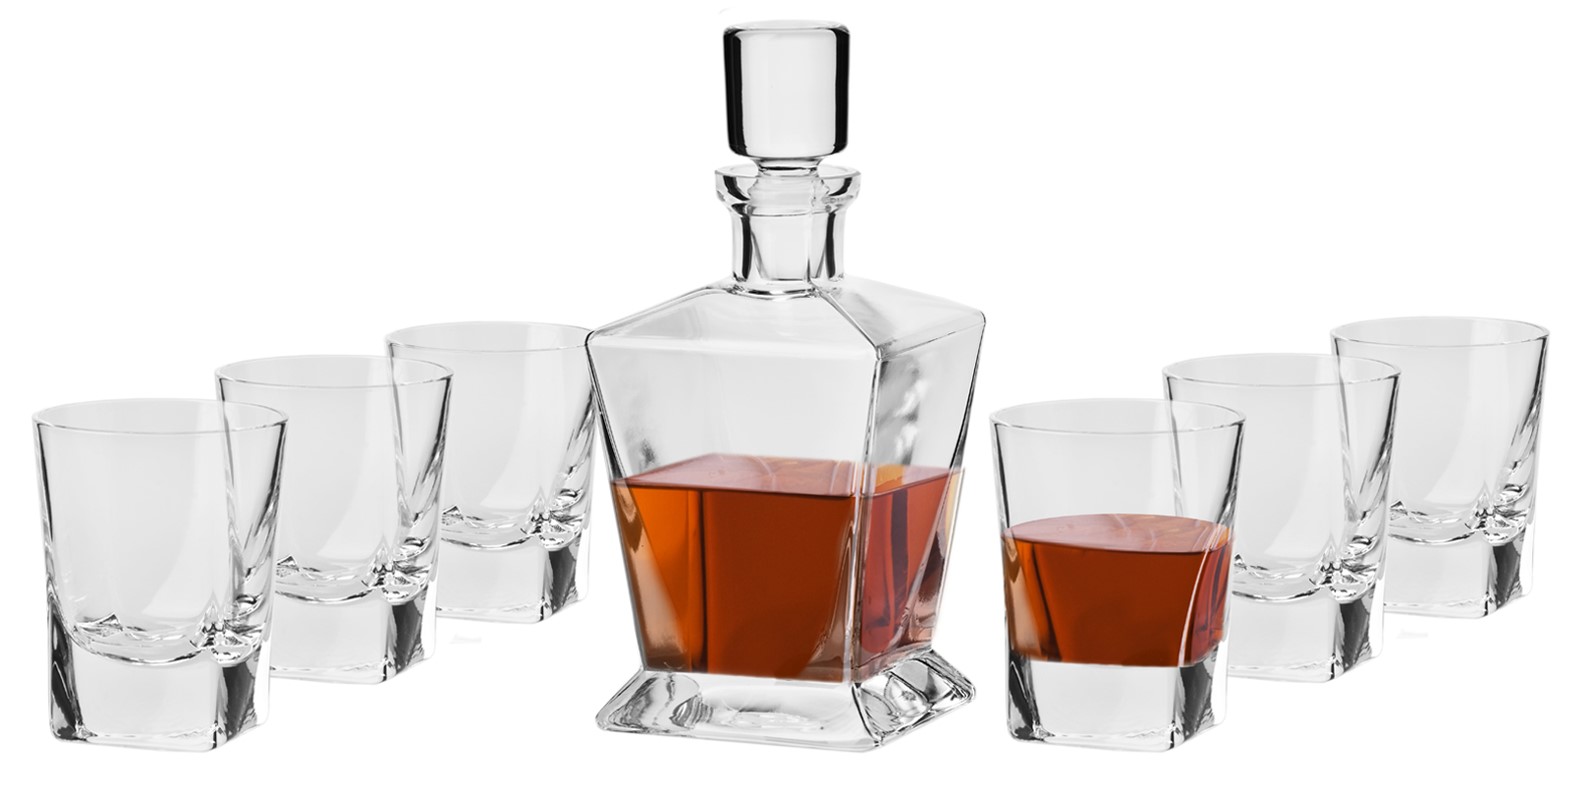 Magnificent 7-piece whiskey set